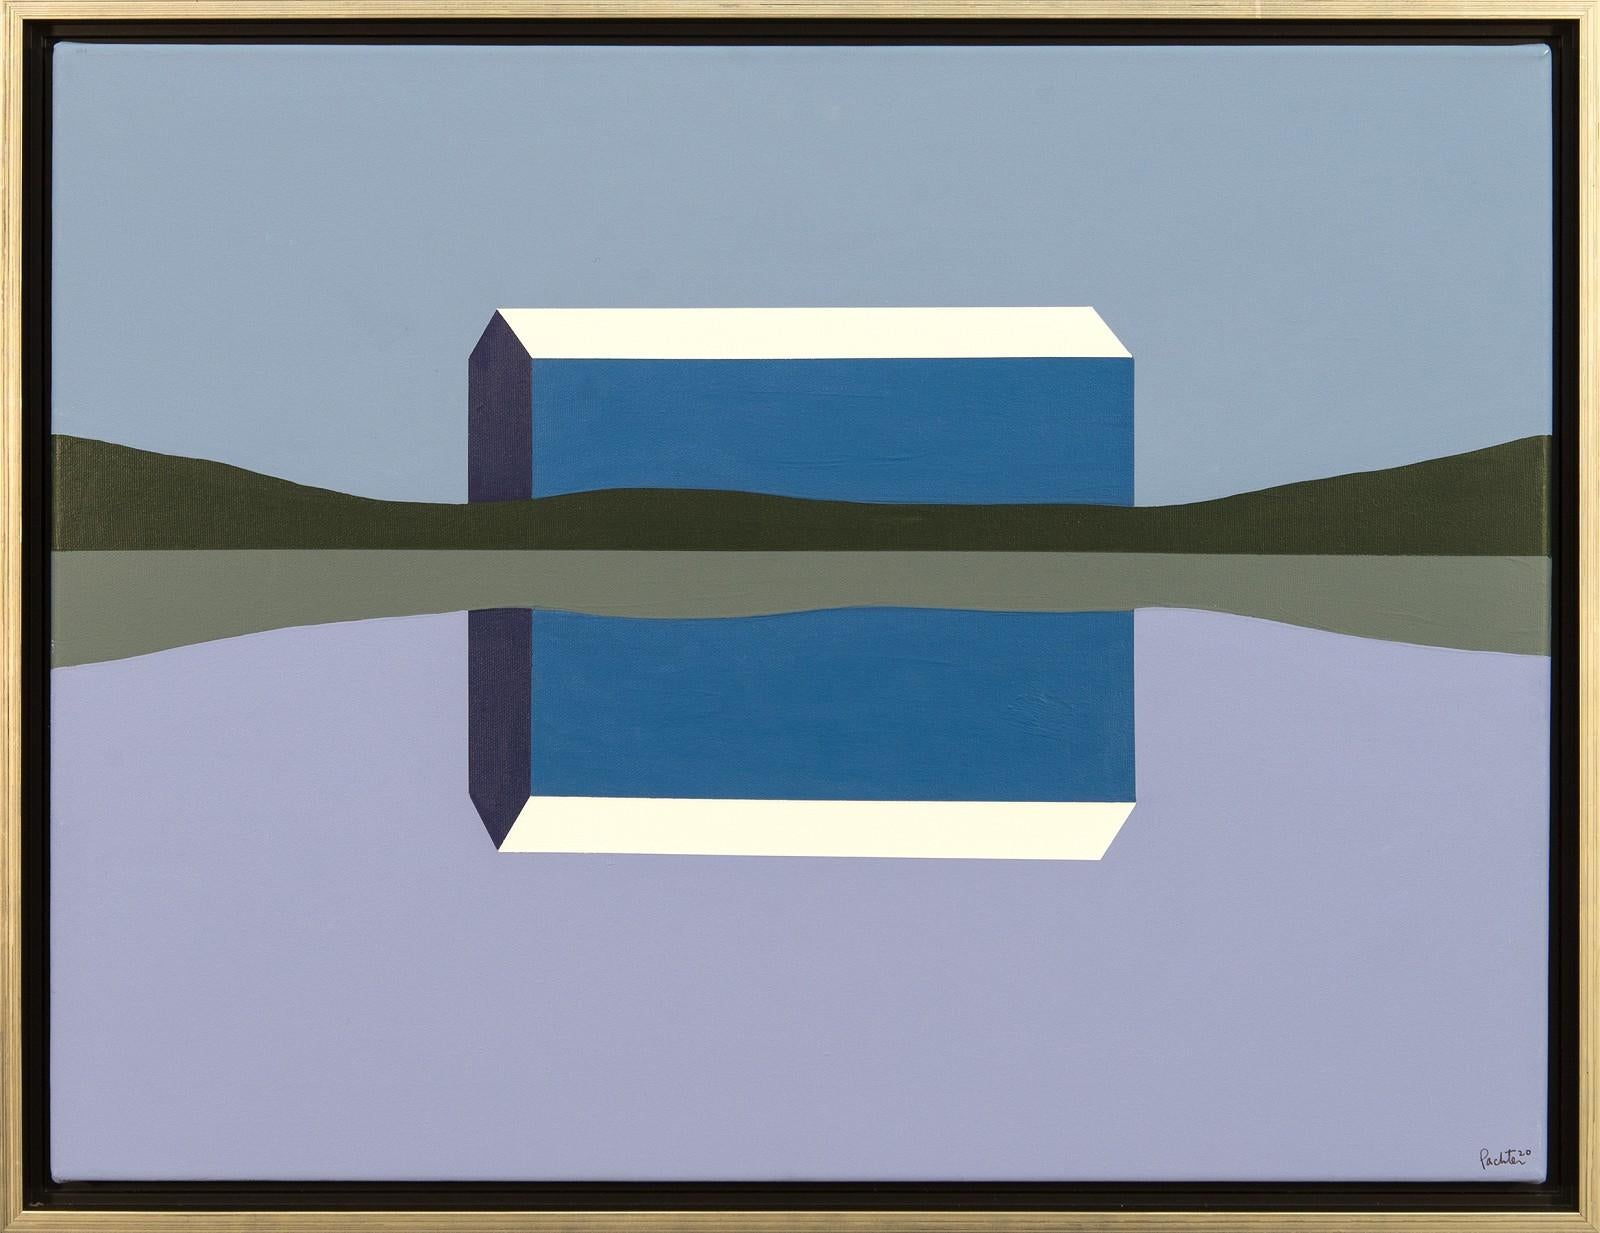 Charles Pachter Landscape Painting - Blue Barn Reflected - navy, purple, landscape, abstracted, acrylic on canvas